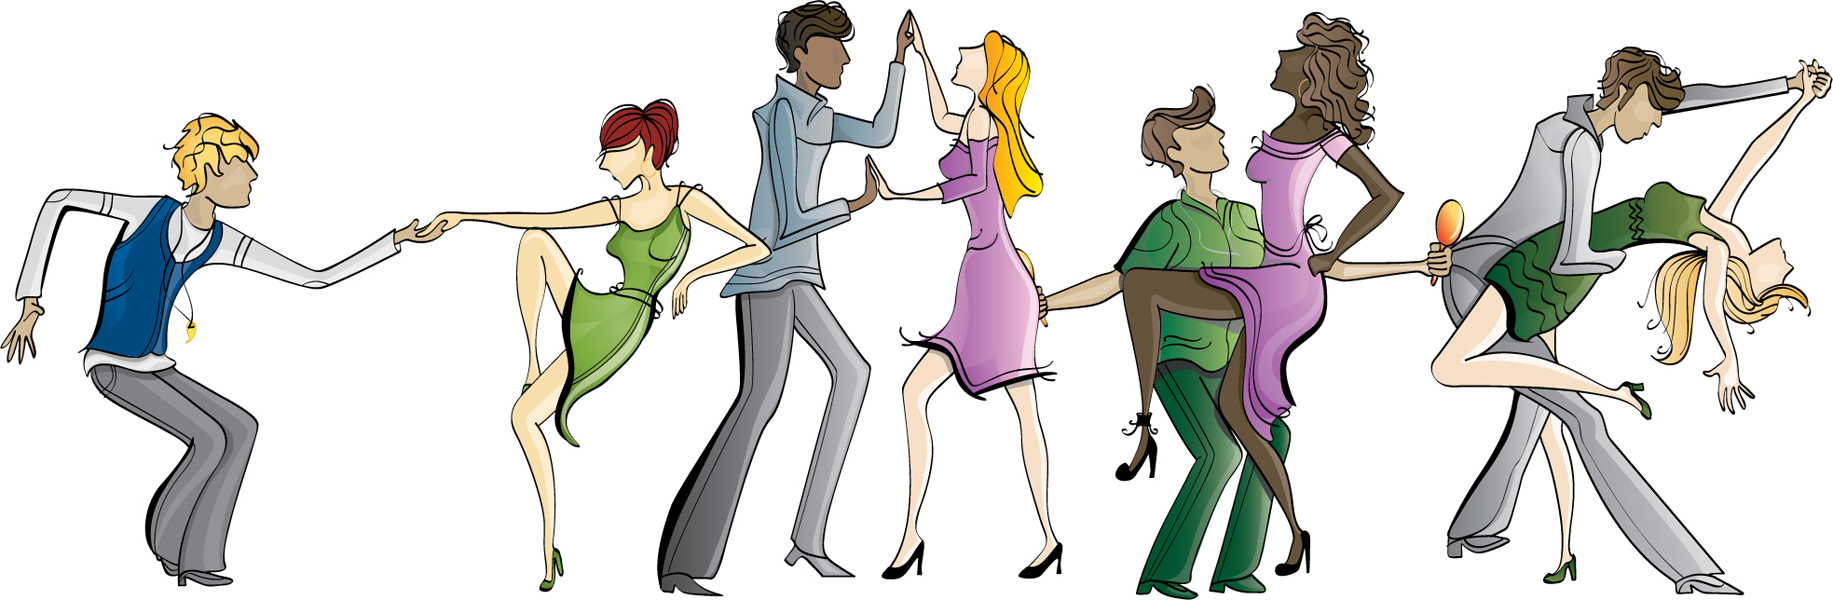 "Dance" illustration by Flickr user Luciana Ruivo